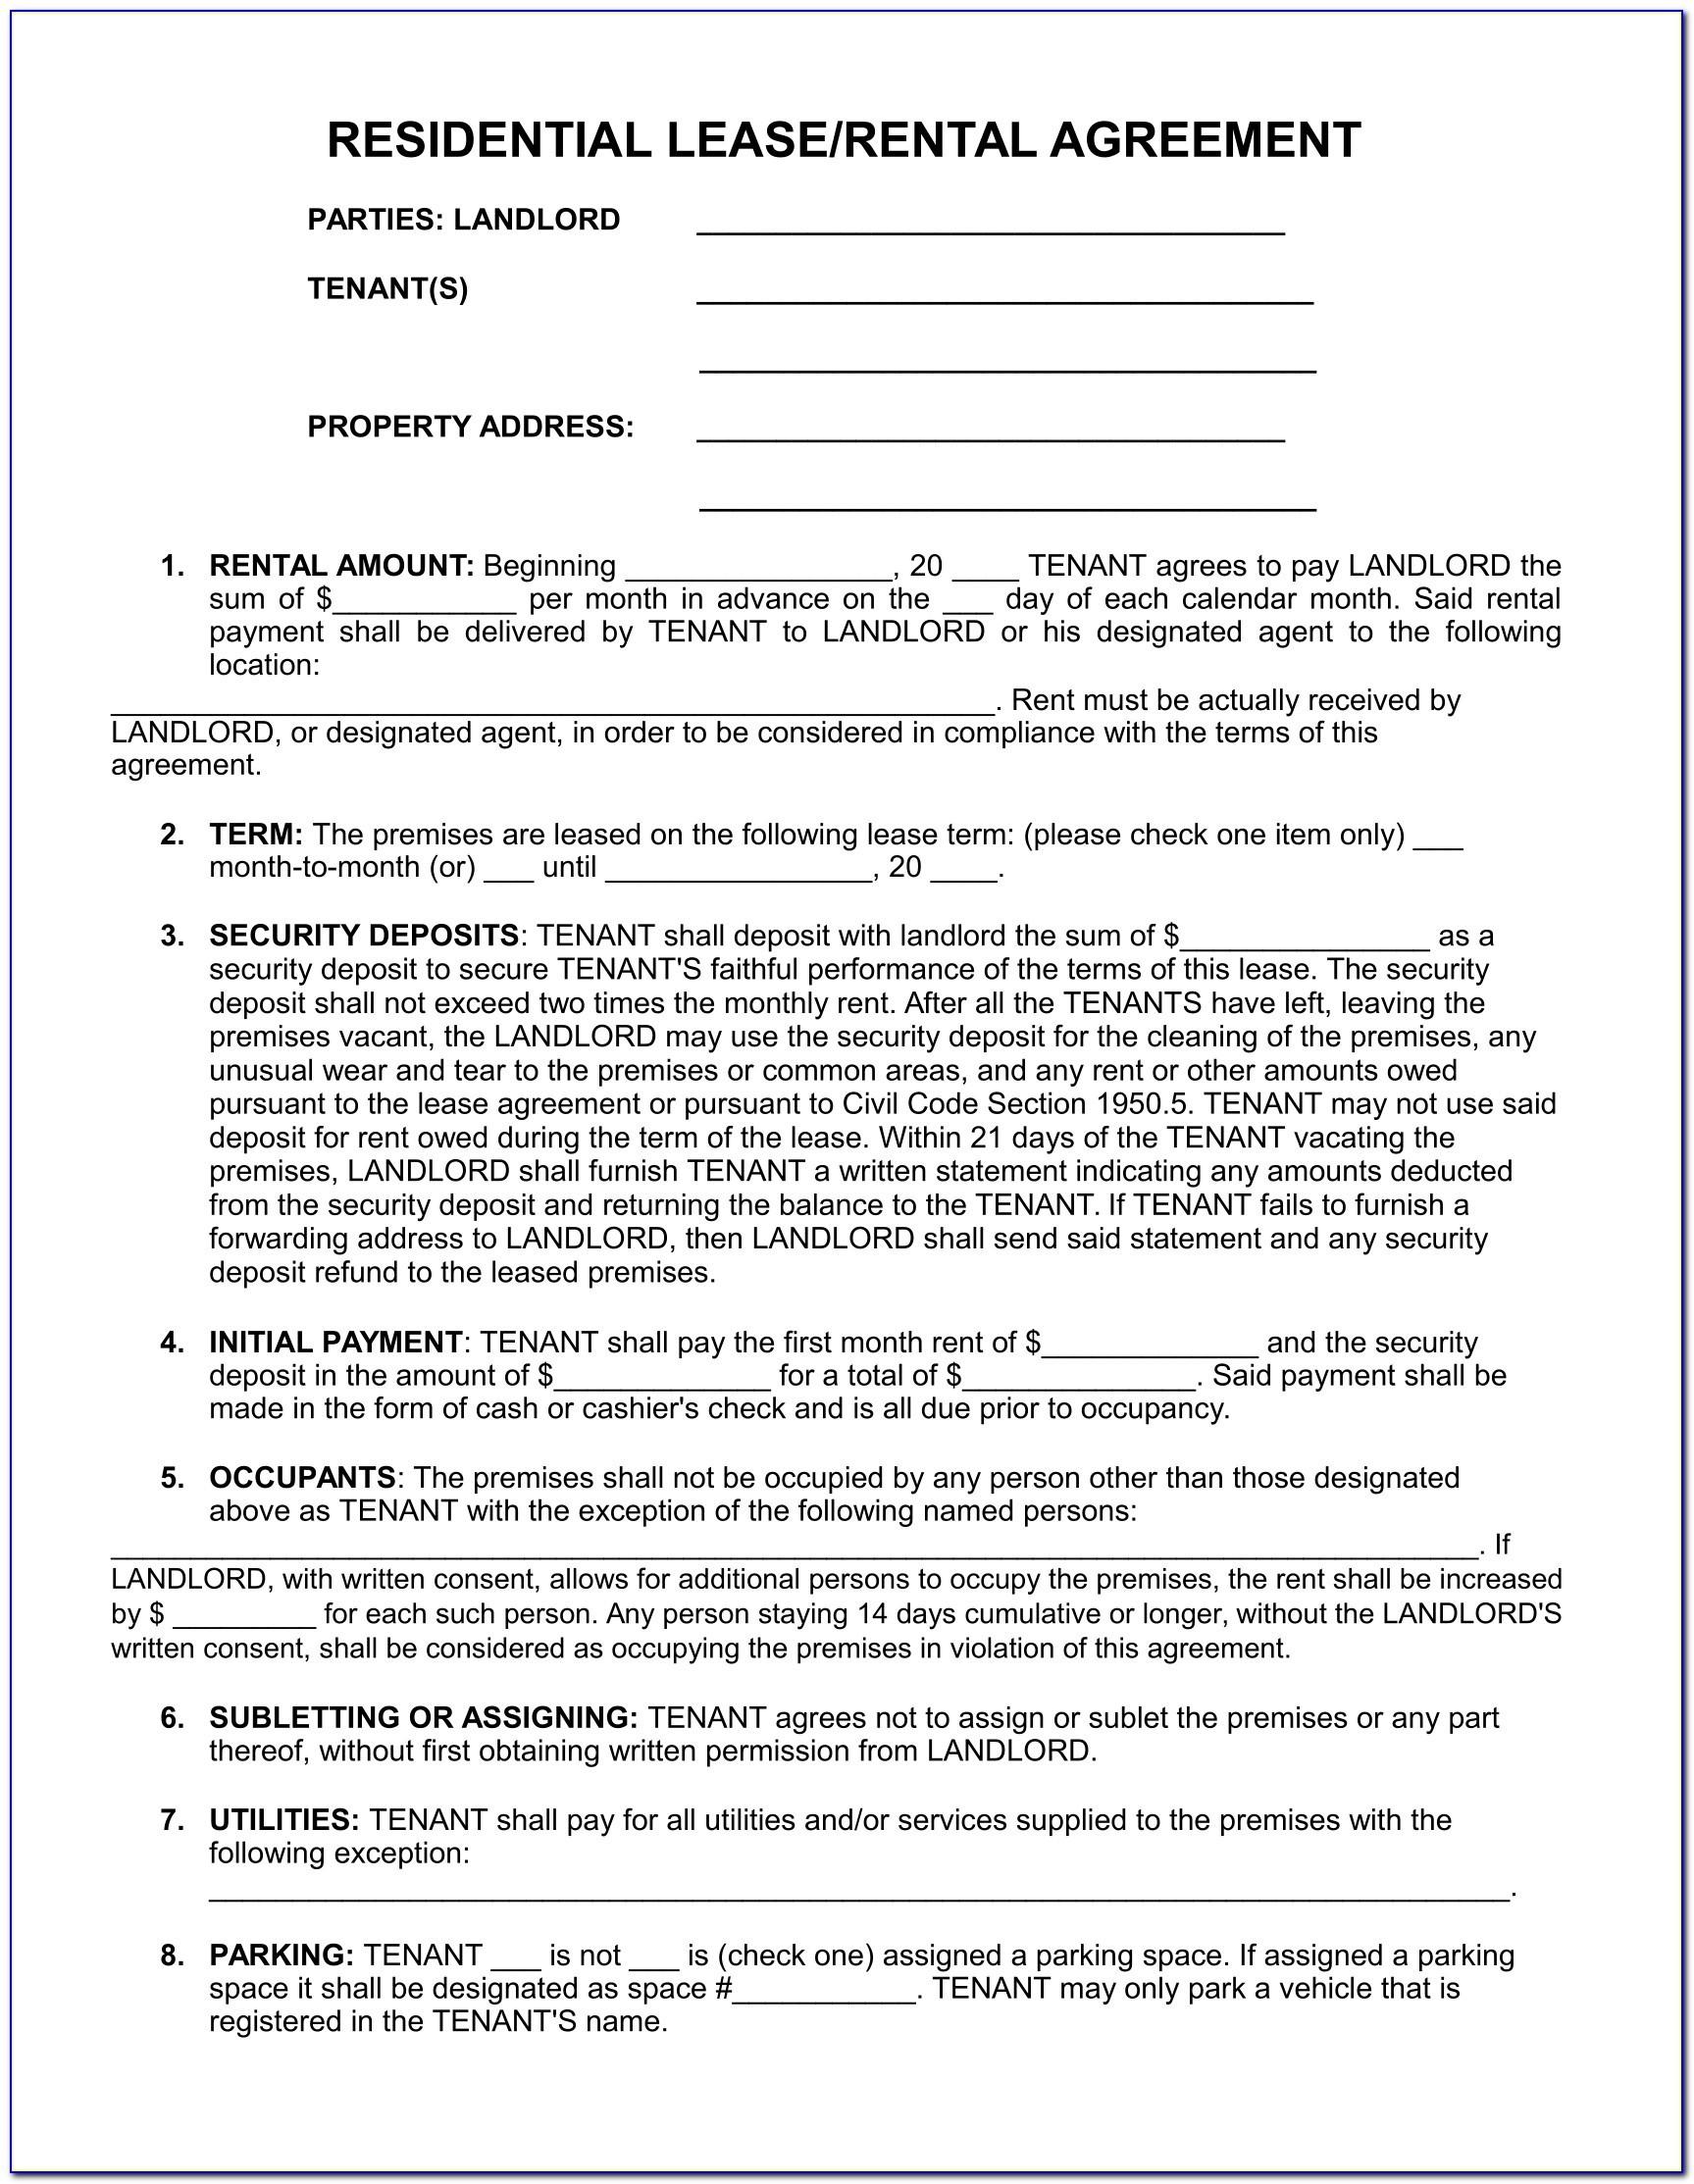 Florida Residential Lease Agreement Template Free